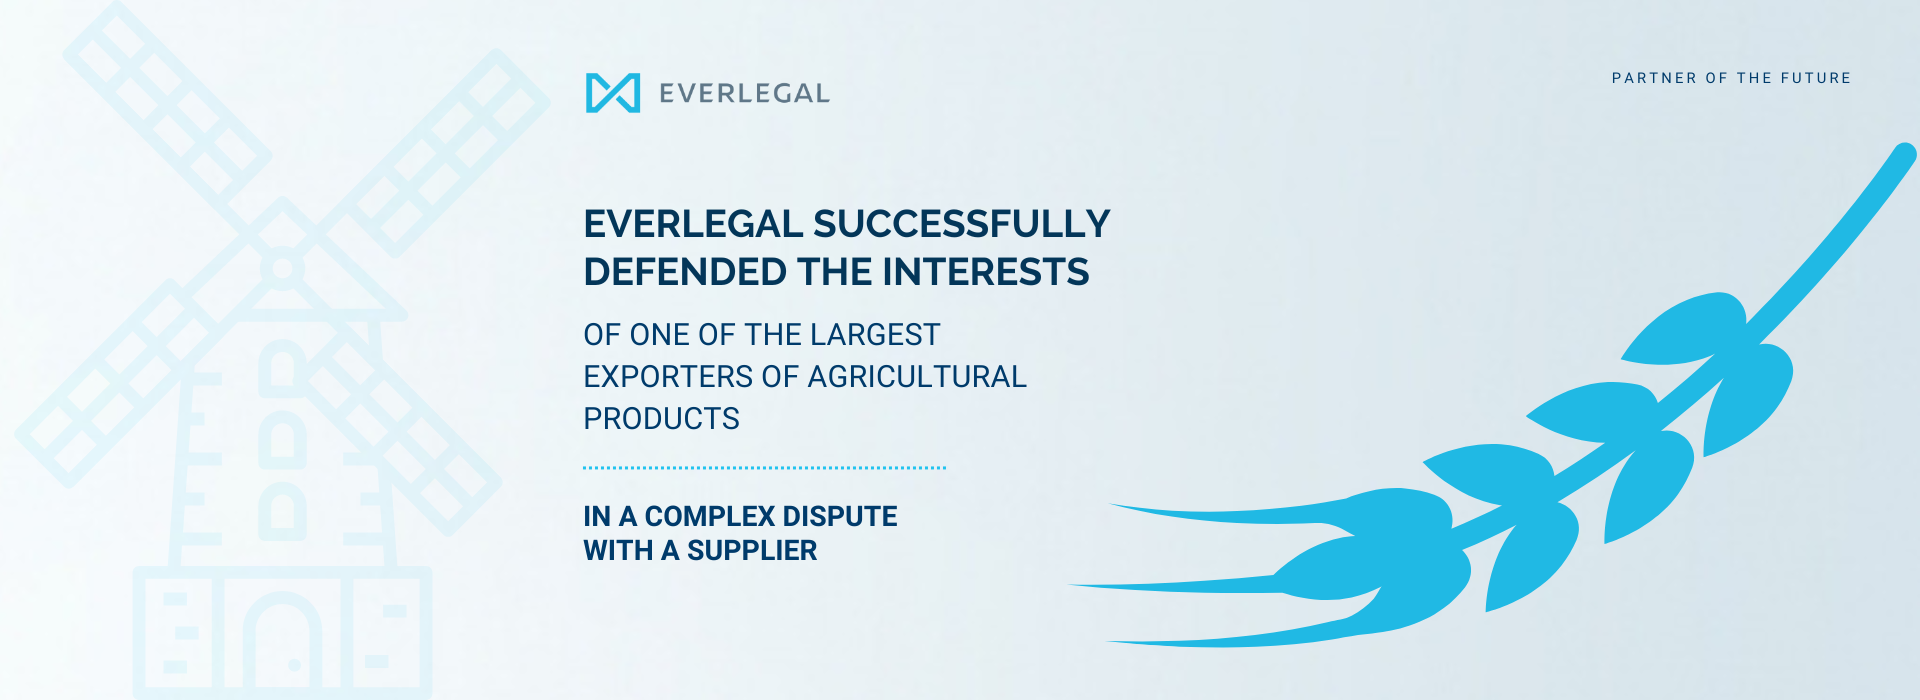 EVERLEGAL Successfully Defended the Interests of Louis Dreyfus Company Ukraine in a Complex Dispute with a Supplier